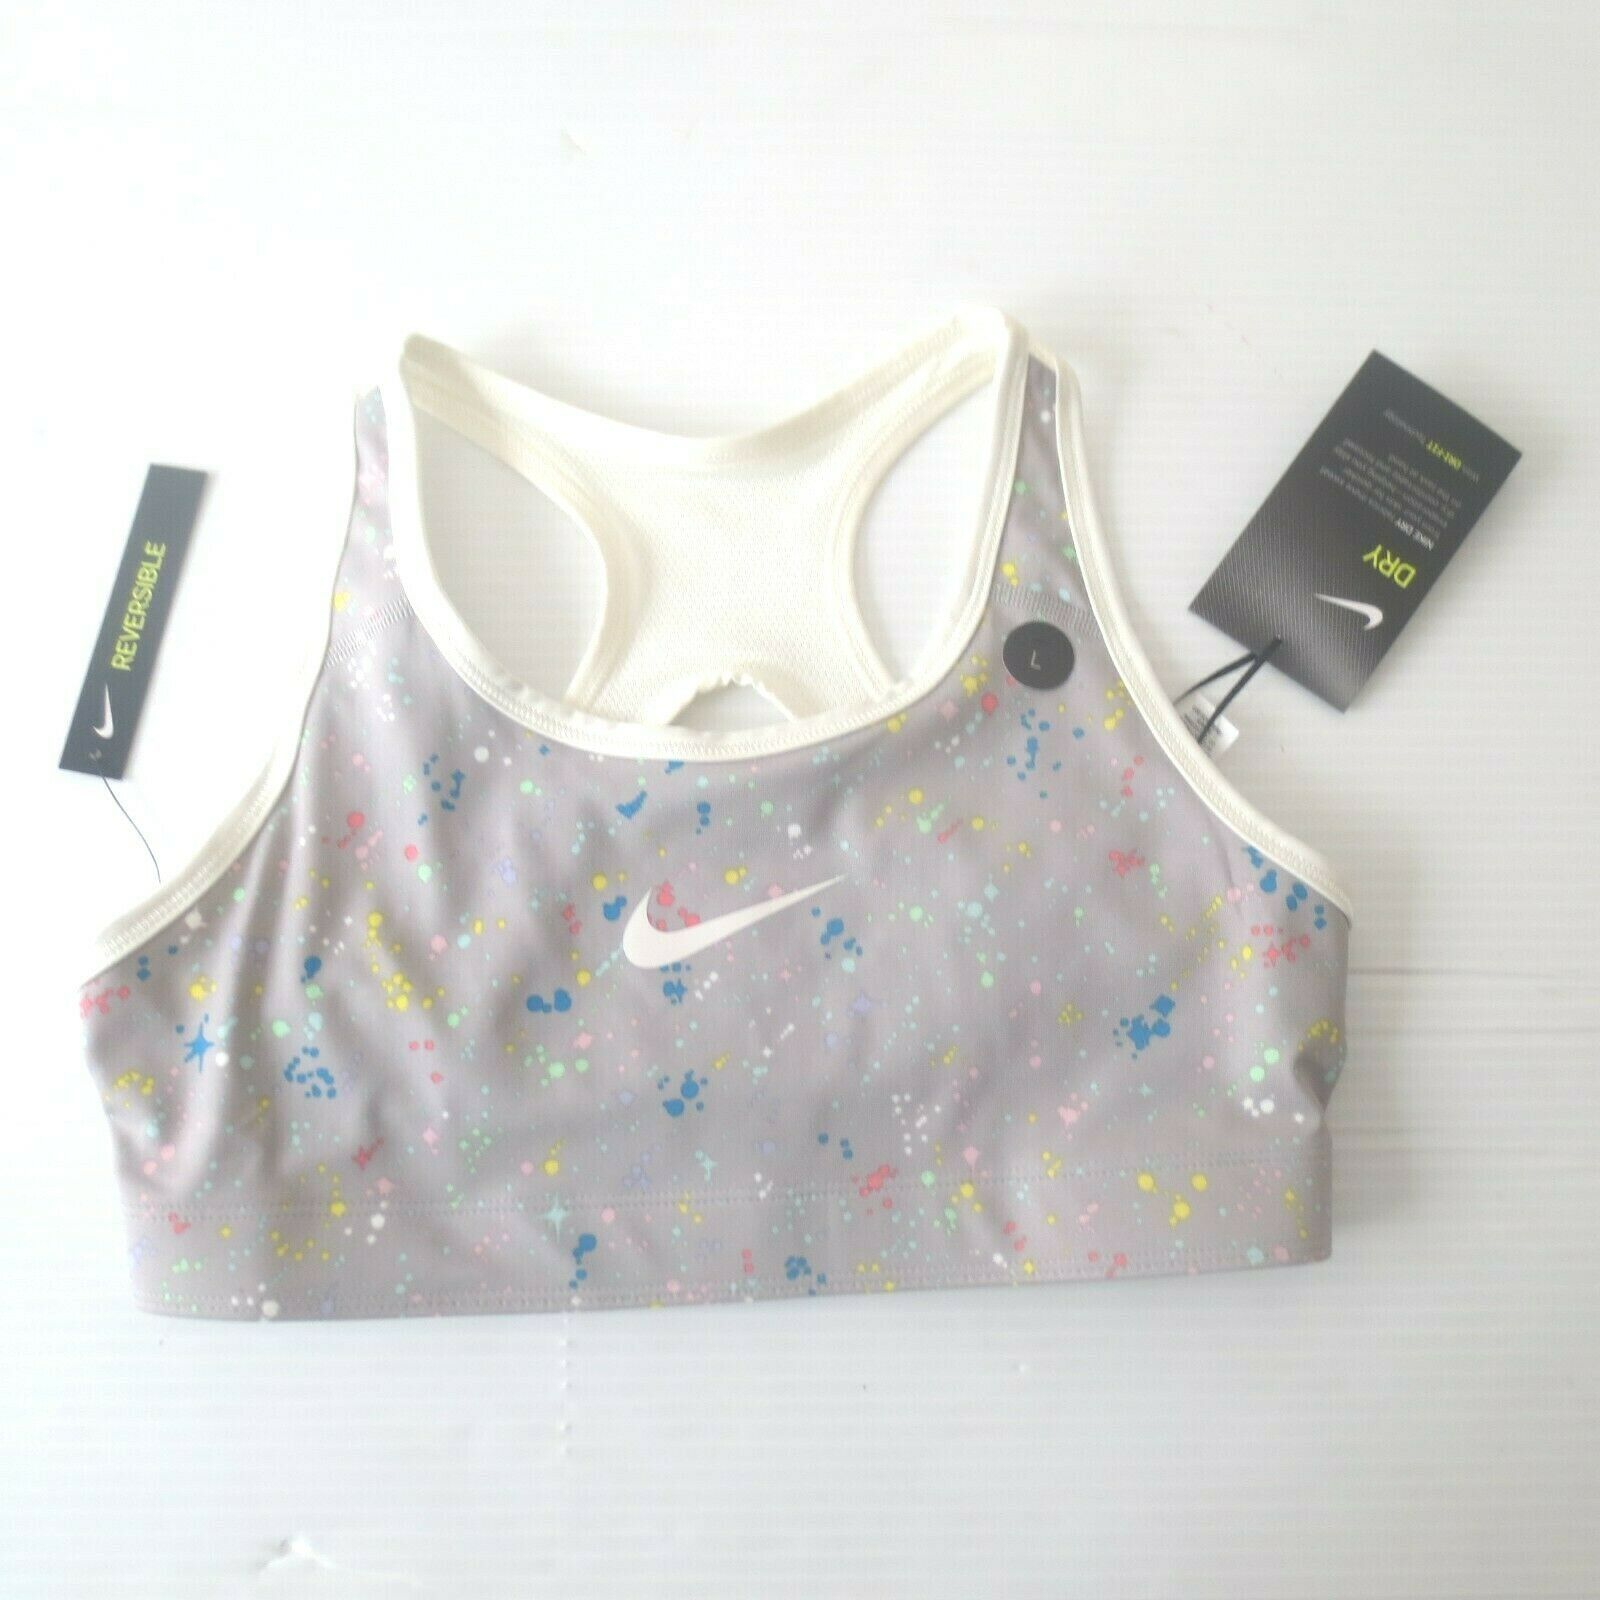 Primary image for Nike Girls Sports Reversible Top Bra - CQ4211 - Gray and White - Size L - NWT